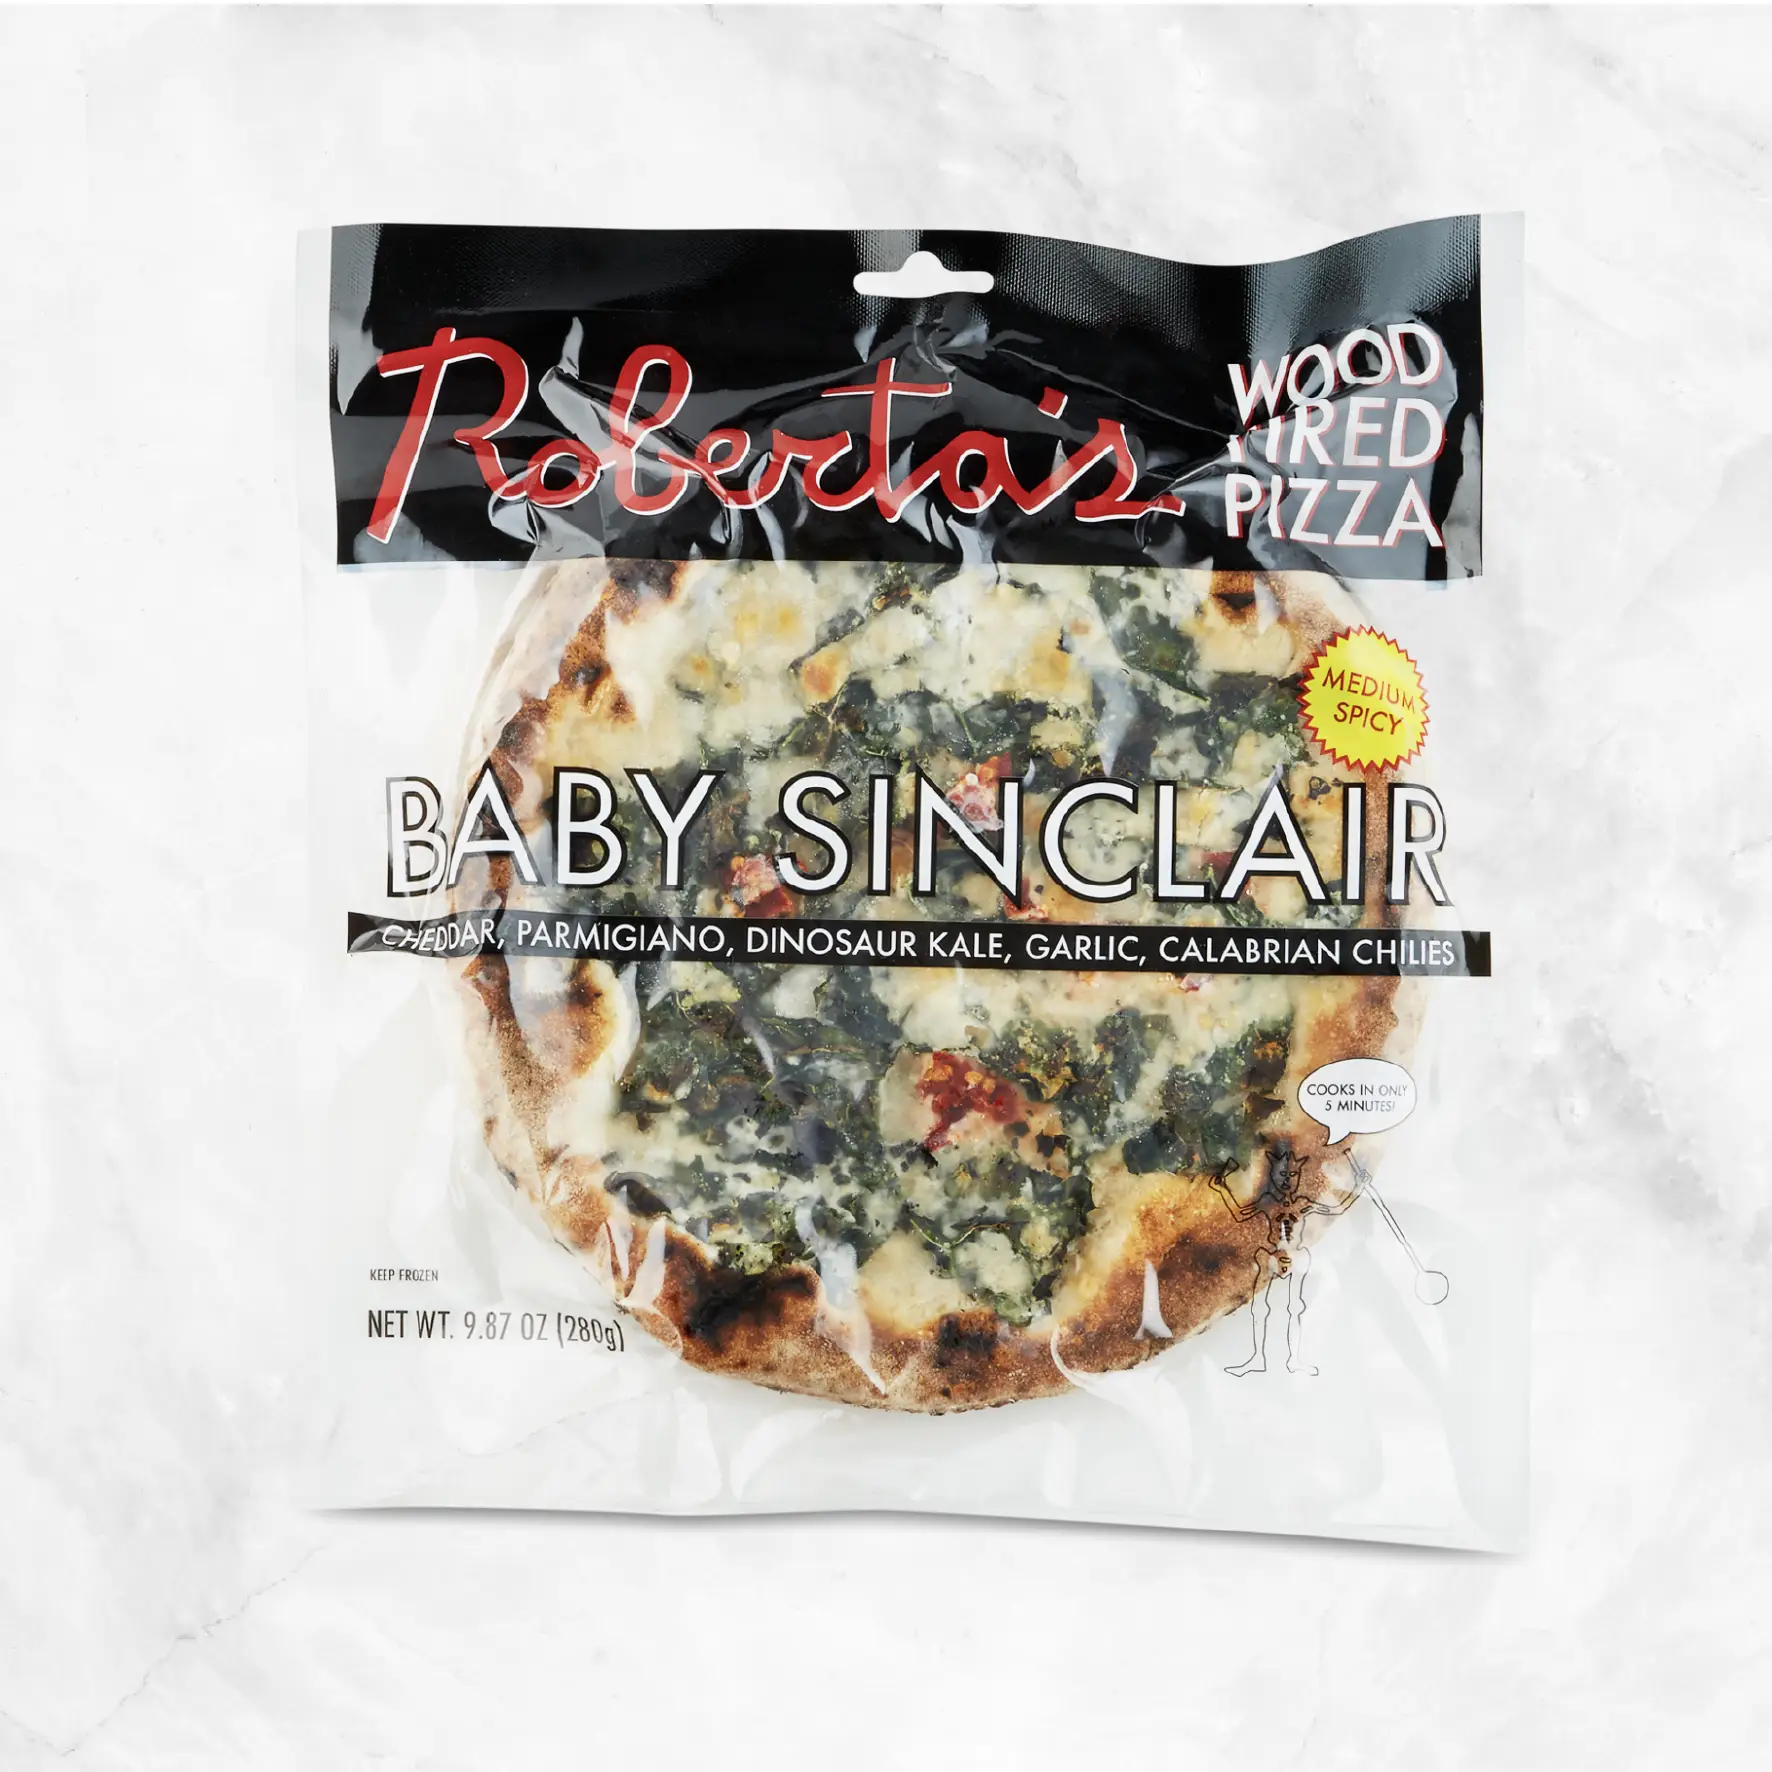 Baby Sinclair Pizza